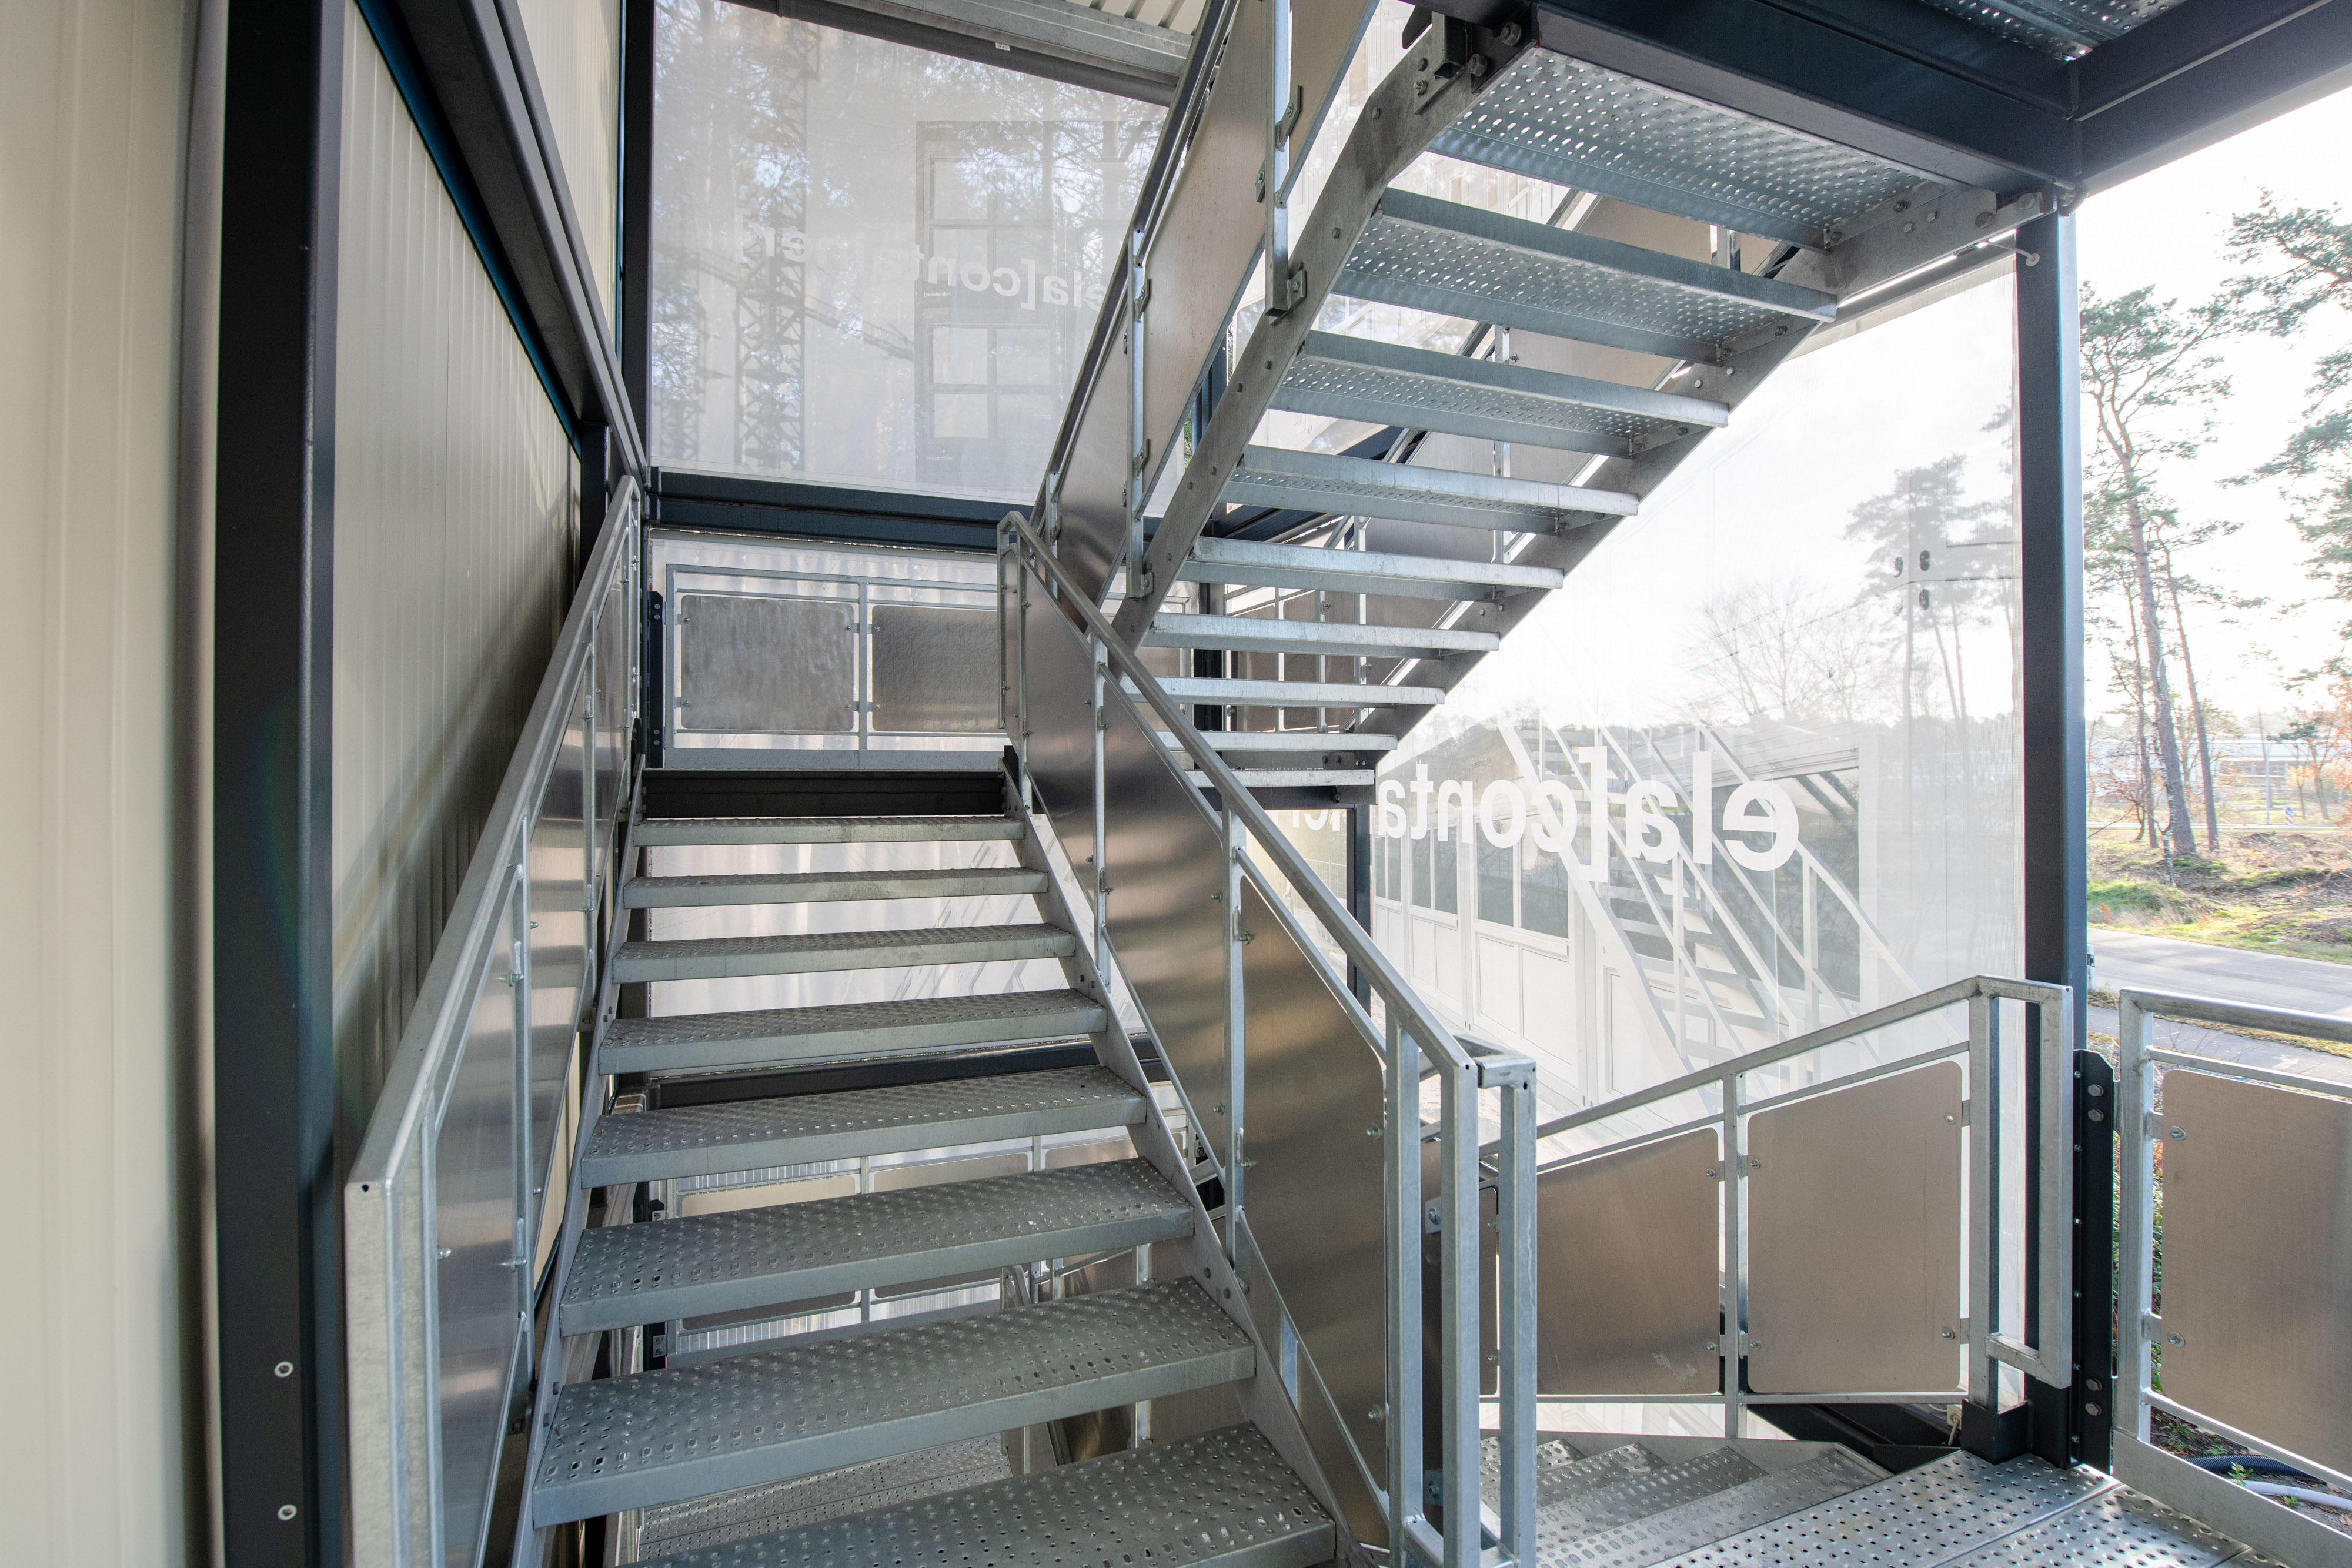 The stairwell is flooded with light. Meshbanners protect against wind and weather.